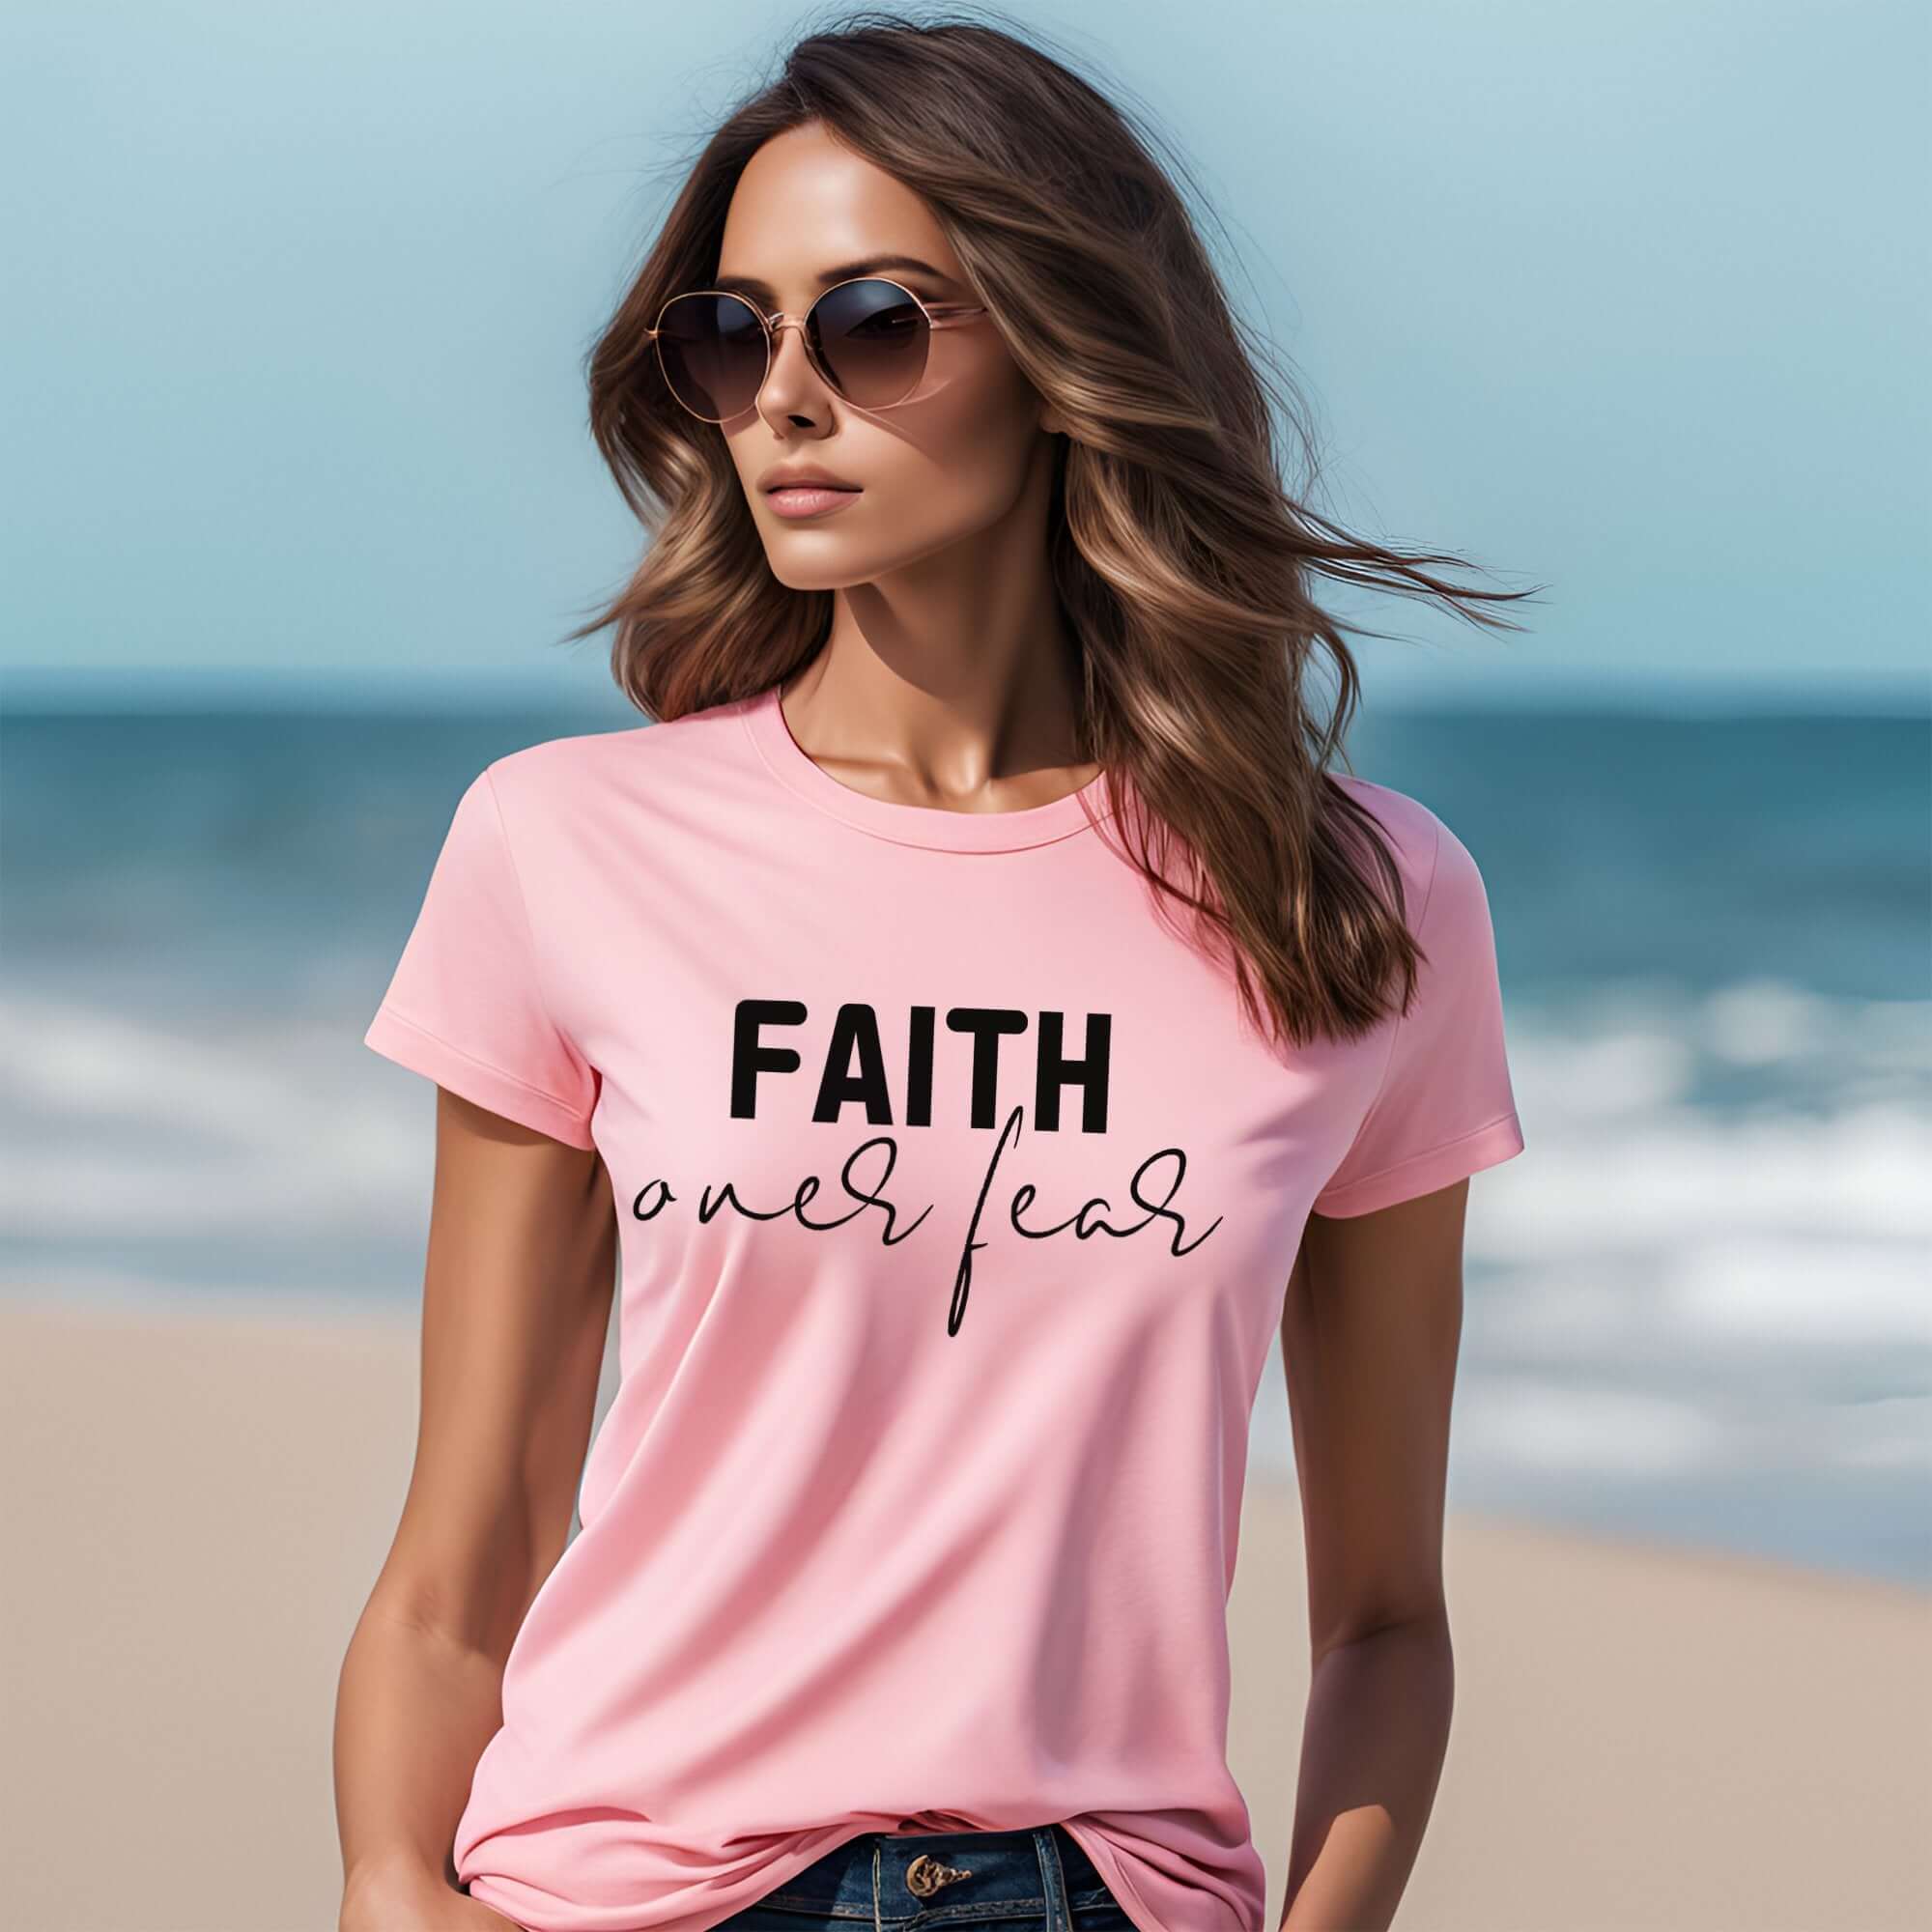 Faith Over Fear Women's Short Sleeve TeeEmbrace a message of positivity and boldness with this stylish "Faith Over Fear" T-shirt. Crafted for comfort and durability, this tee features a minimalist design with the inspiring phrase "Faith over fear" in an e